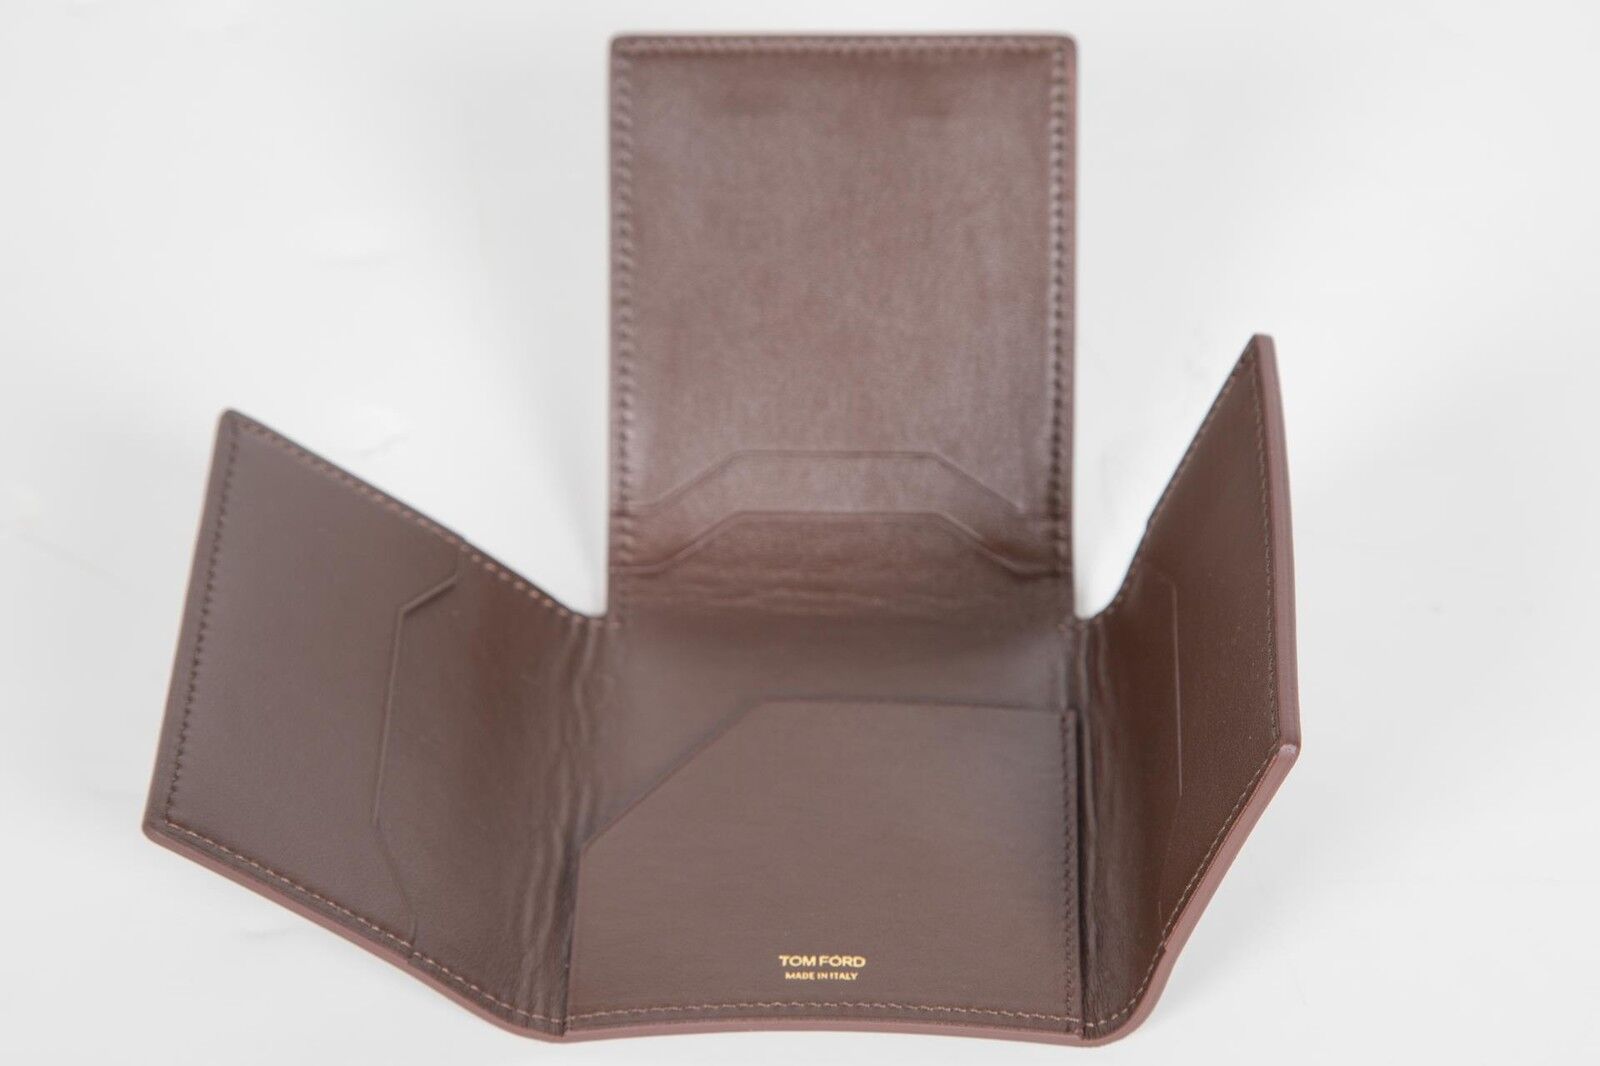 Tom Ford New Smooth Brown 100% Calf Leather 4 Panel Wallet Card Holder Italy